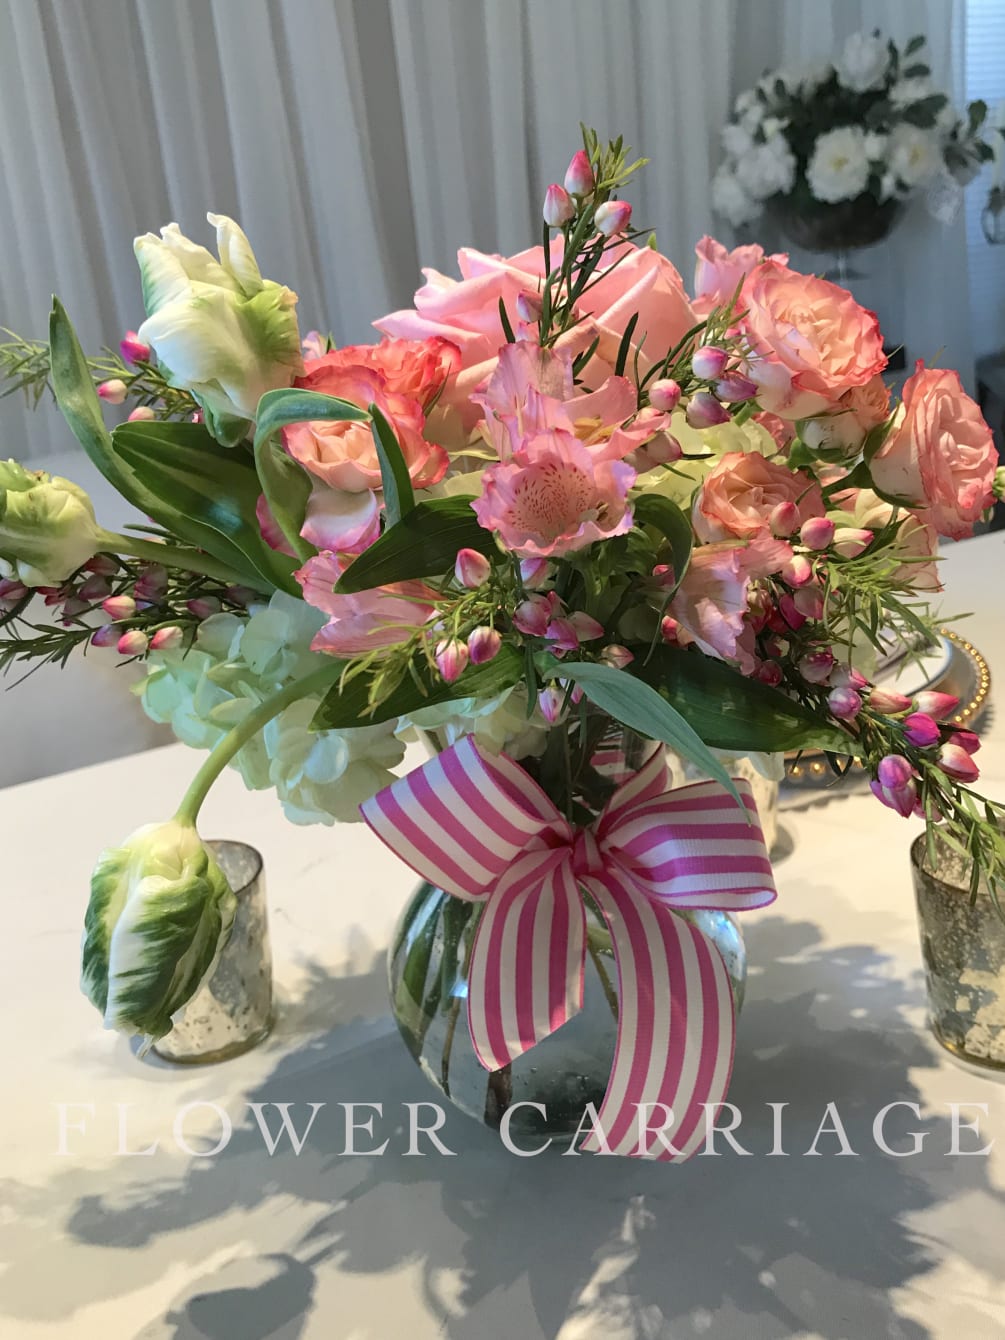 This soft pink makes this bouquet very delicate delivering a feel of